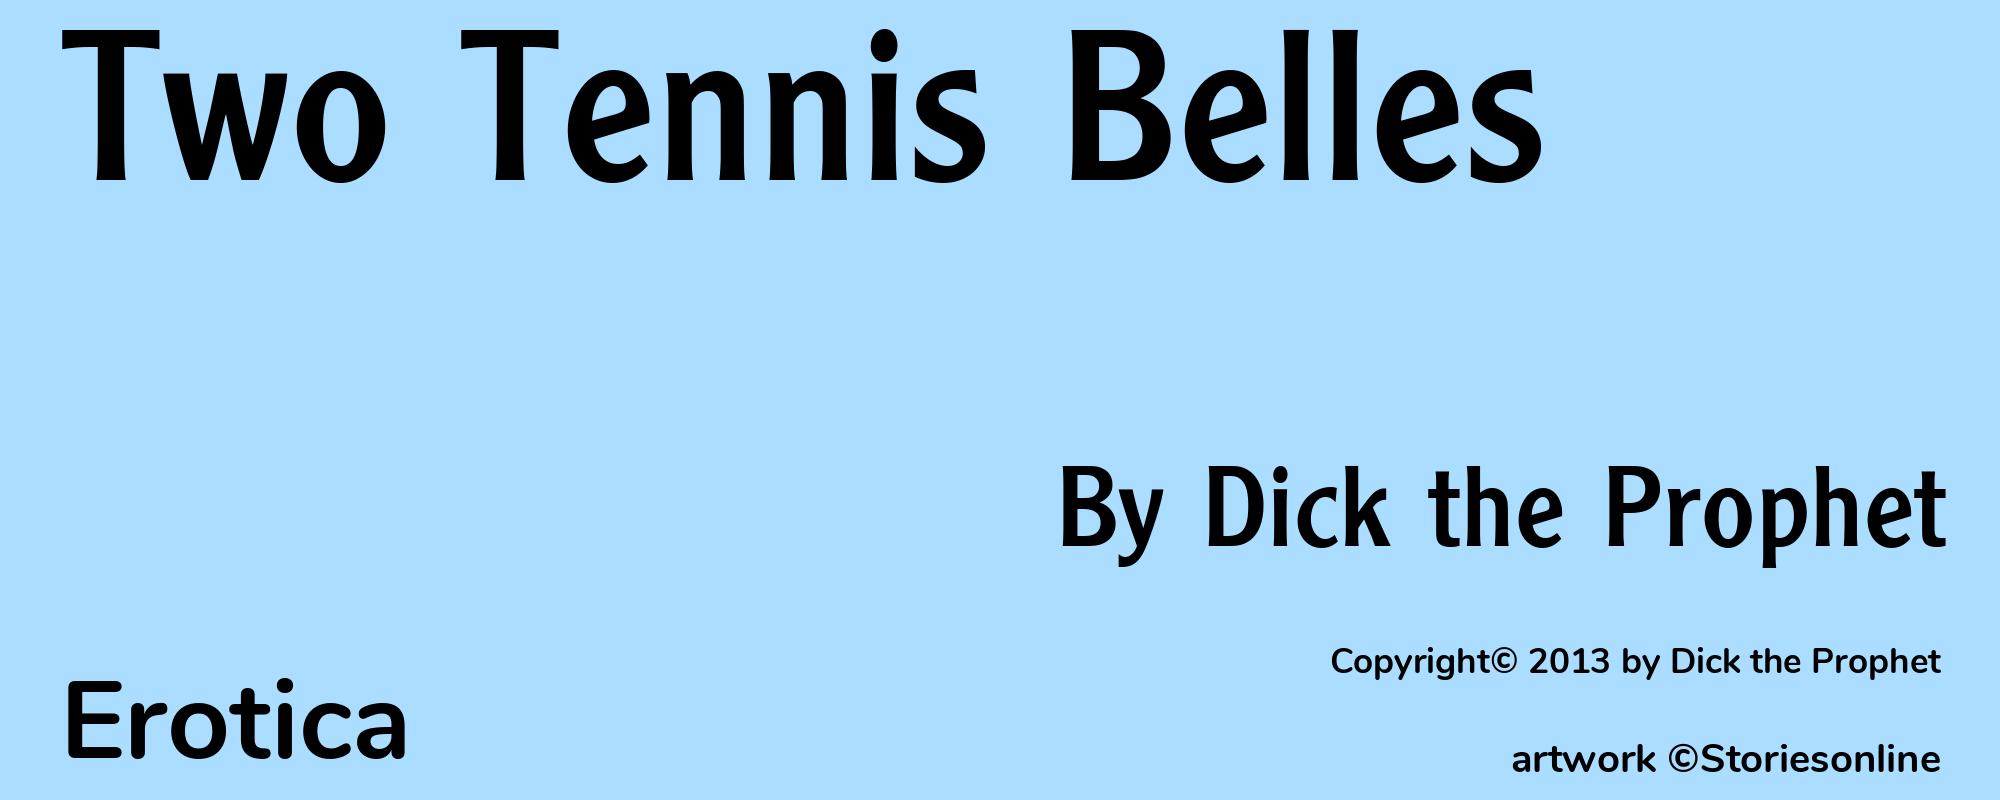 Two Tennis Belles - Cover